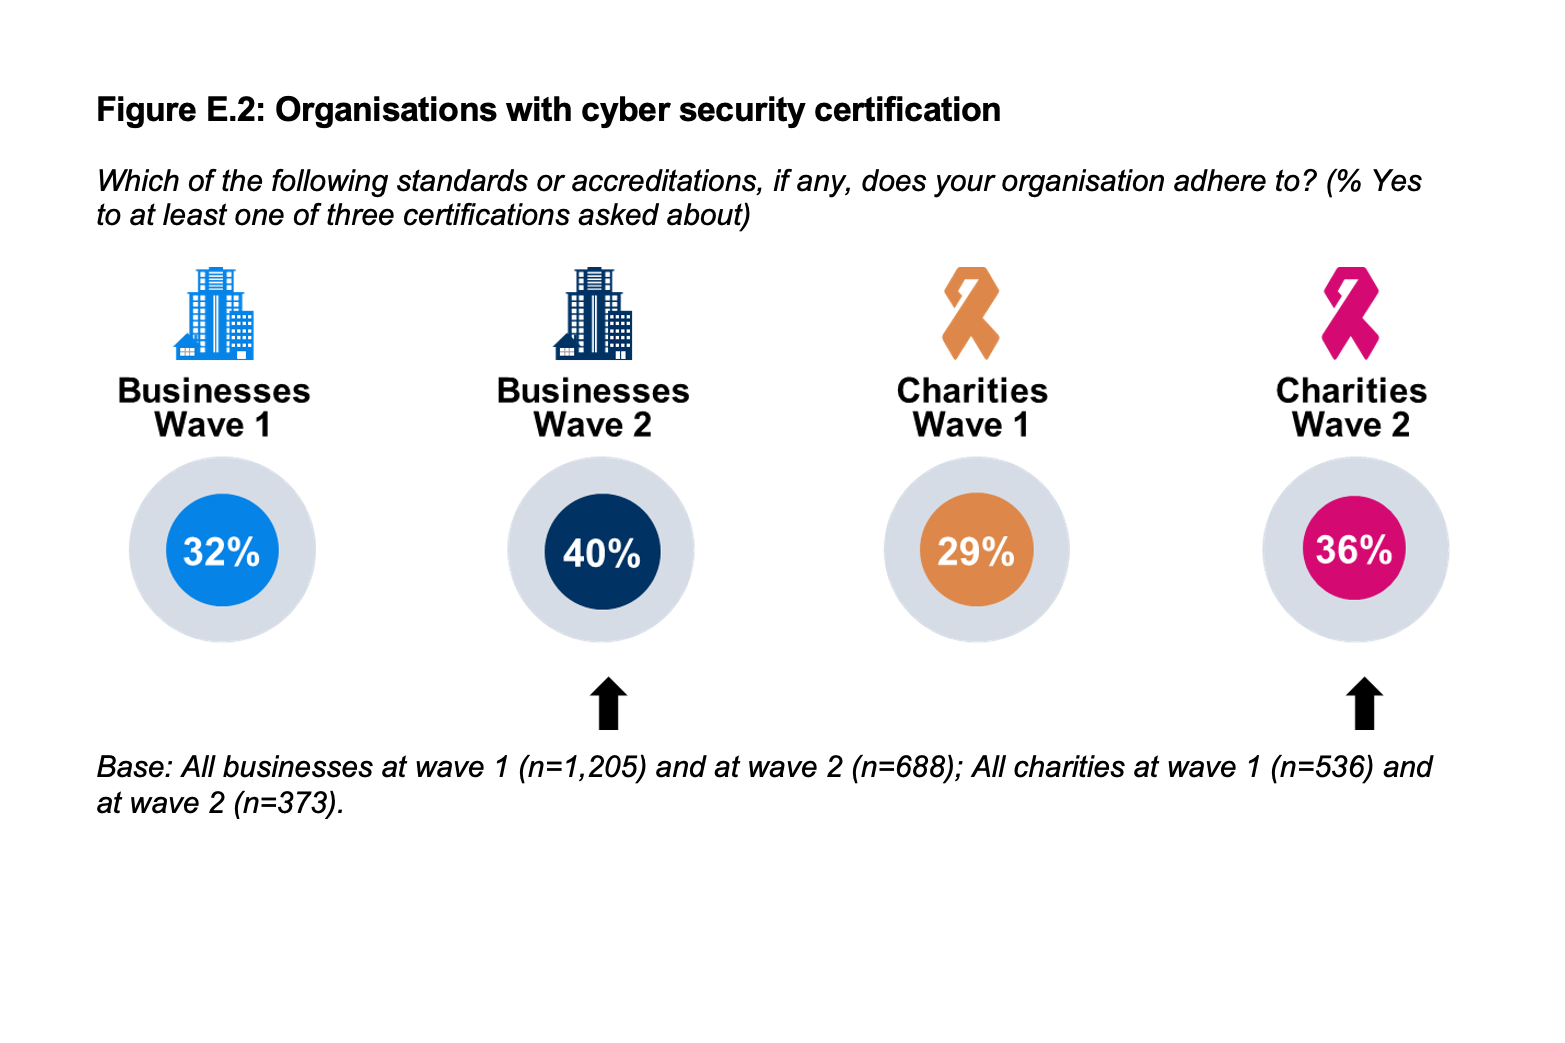 Organisations with cyber security certification. Businesses wave one: 32%; Businesses wave two: 40%; Charities wave one 29%; Charities wave two 36%.